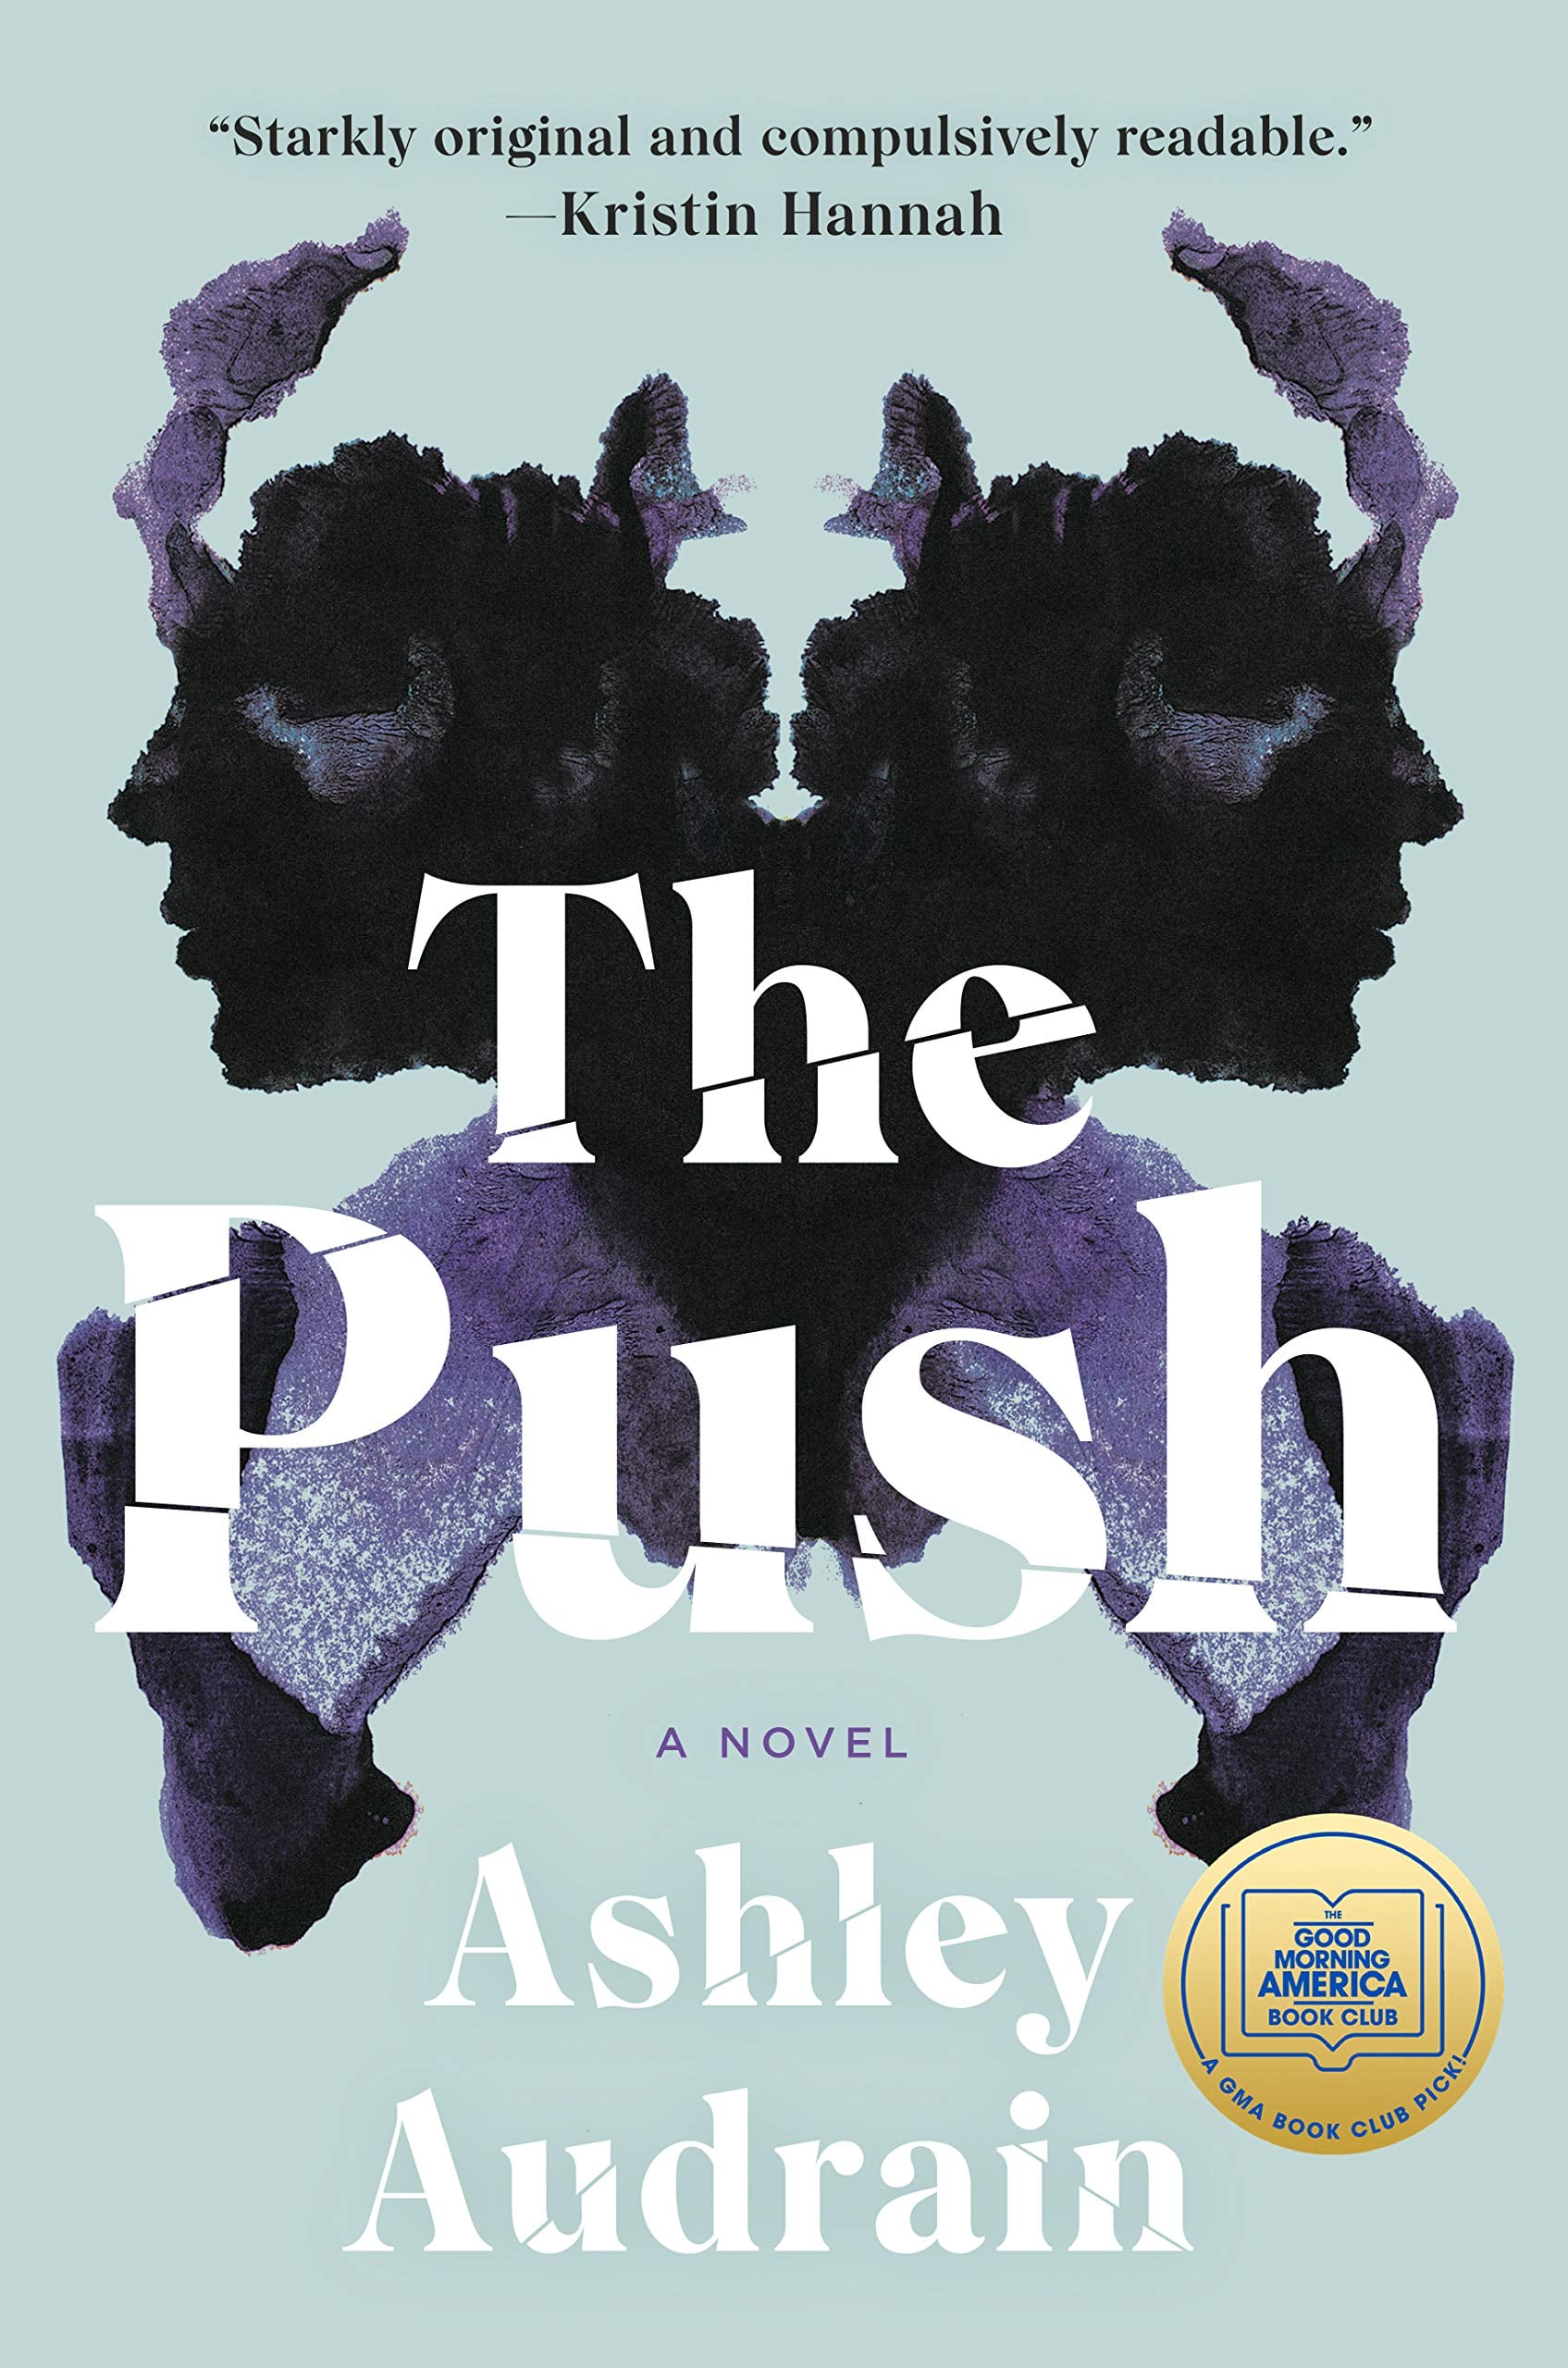 100 handpicked books like The Push (picked by fans)